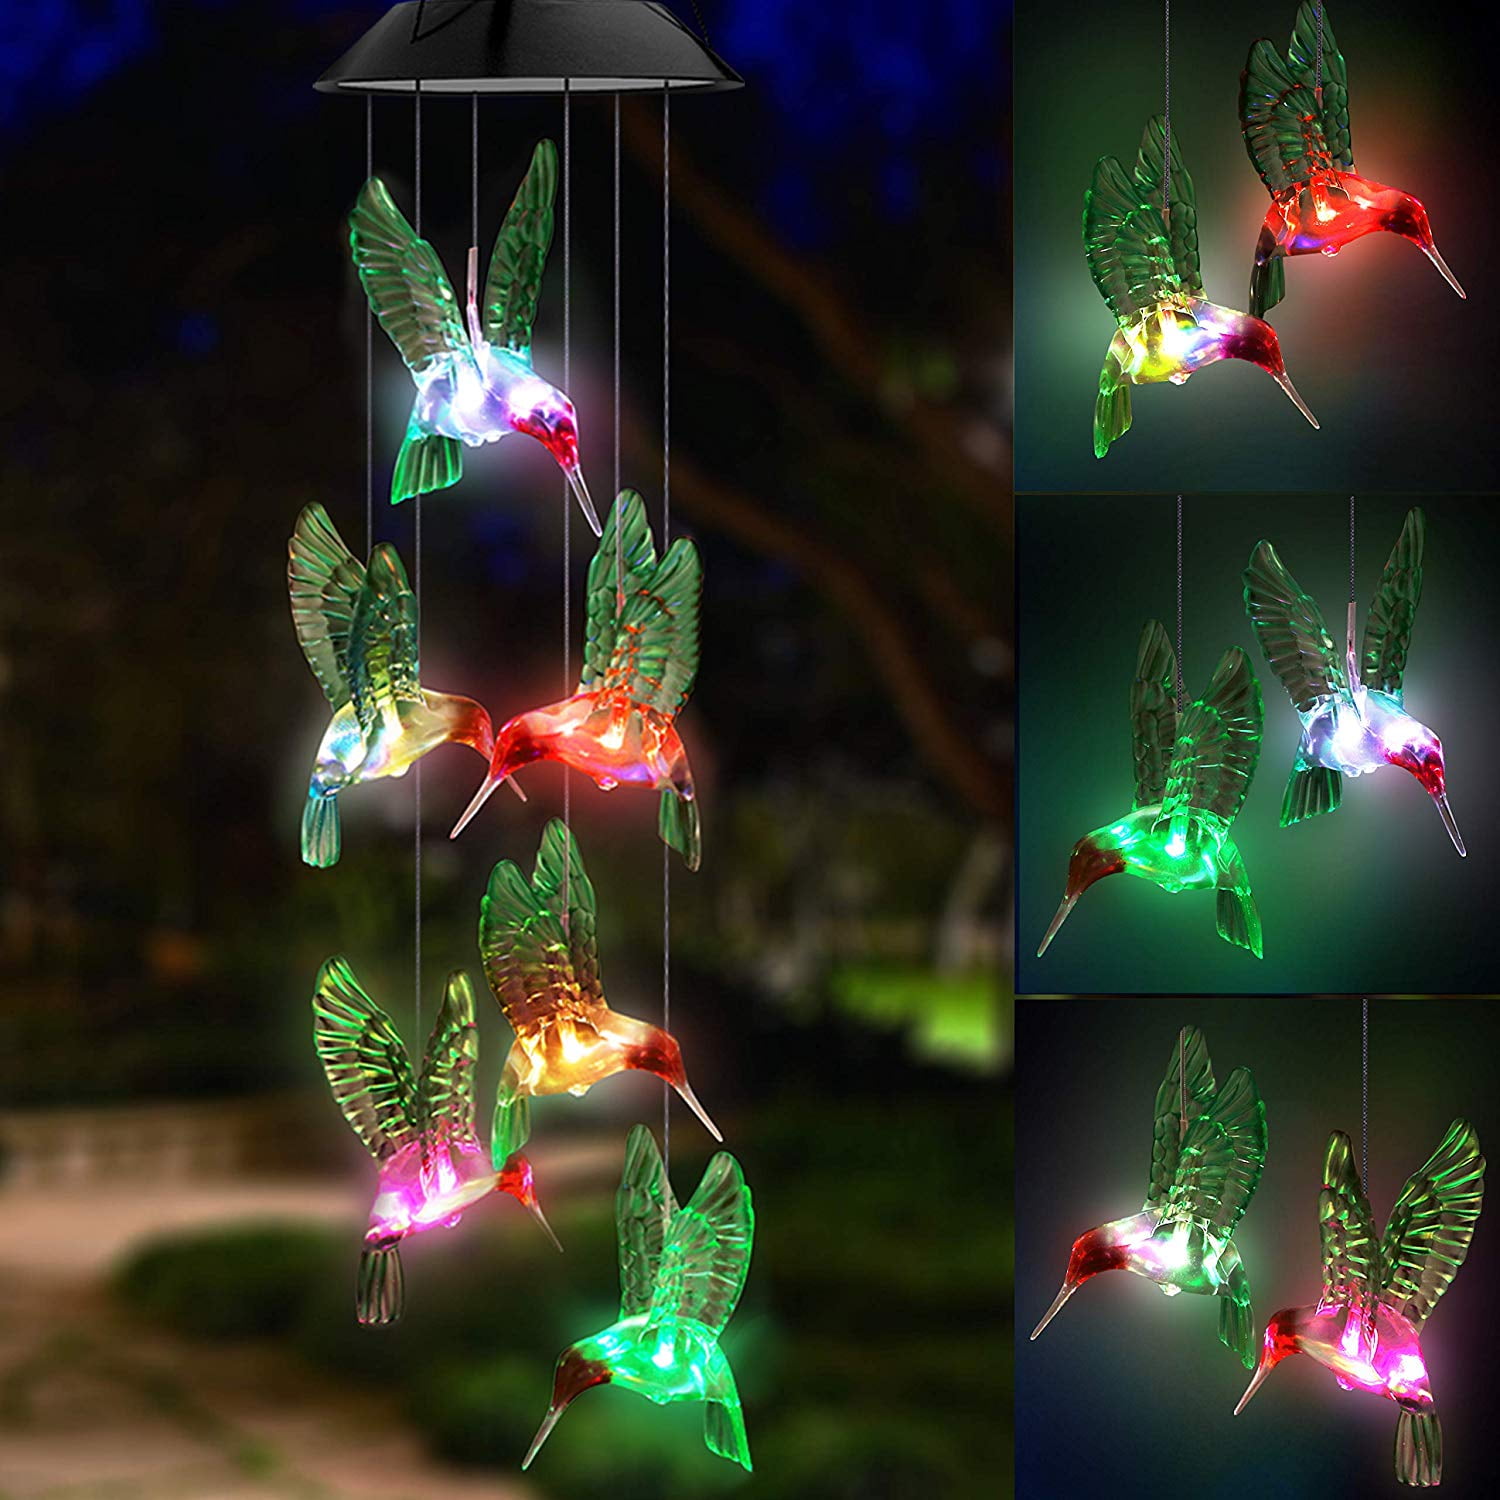 Gifts for mom,Birthday Gifts for mom Wind Chime,Solar Wind Chimes Outdoor,Solar Heart/Hummingbird Wind Chime Outdoor Decor,Yard Decorations Solar Light Mobile,Memorial Wind Chimes,Mobile led